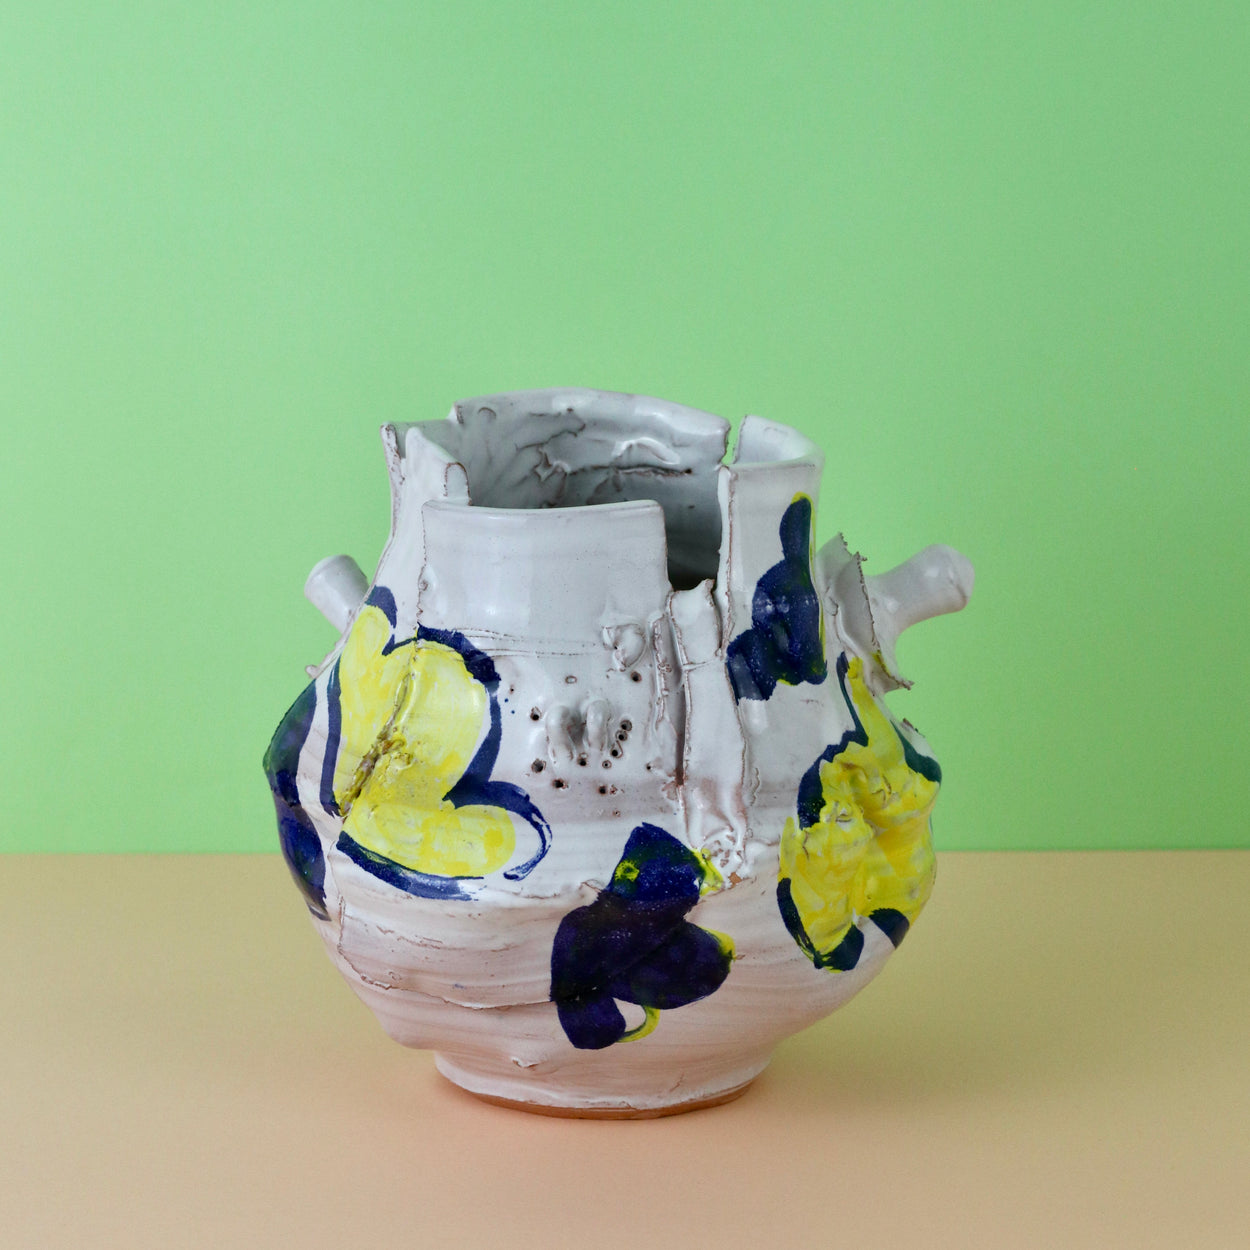 Modern Ceramic Vase by Elin Hughes against a light green and peach background.